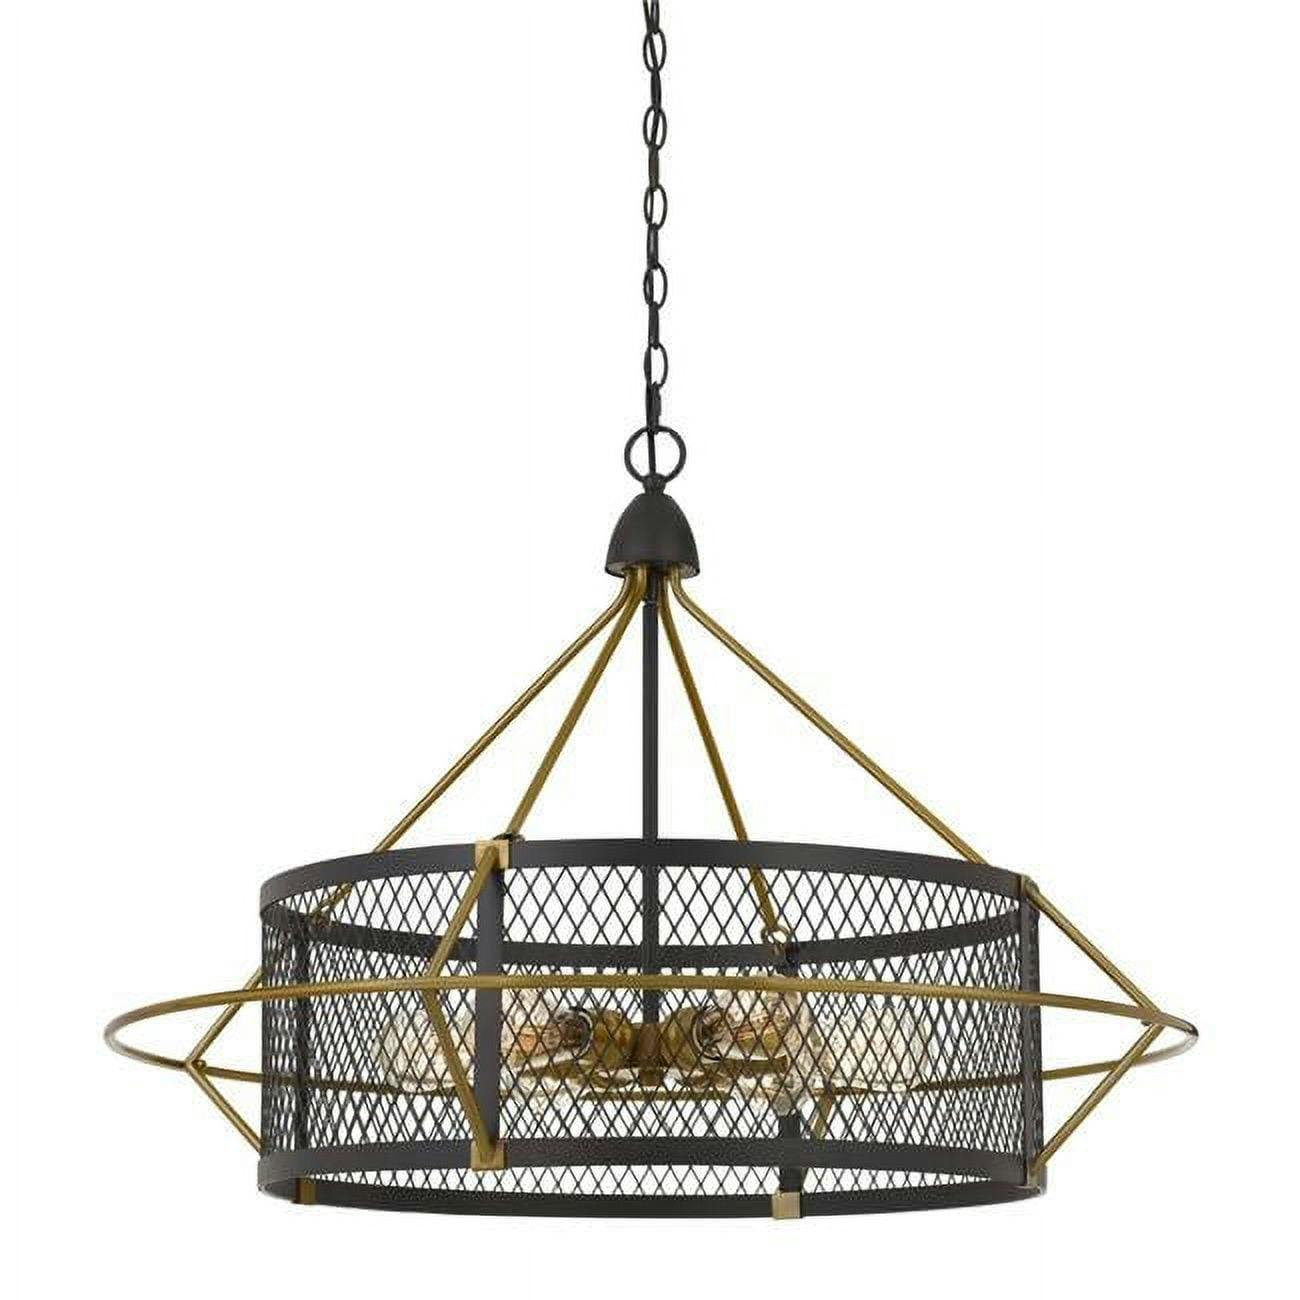 Elegant 33" Black and Gold Metal Mesh Chandelier with 6 Bulbs